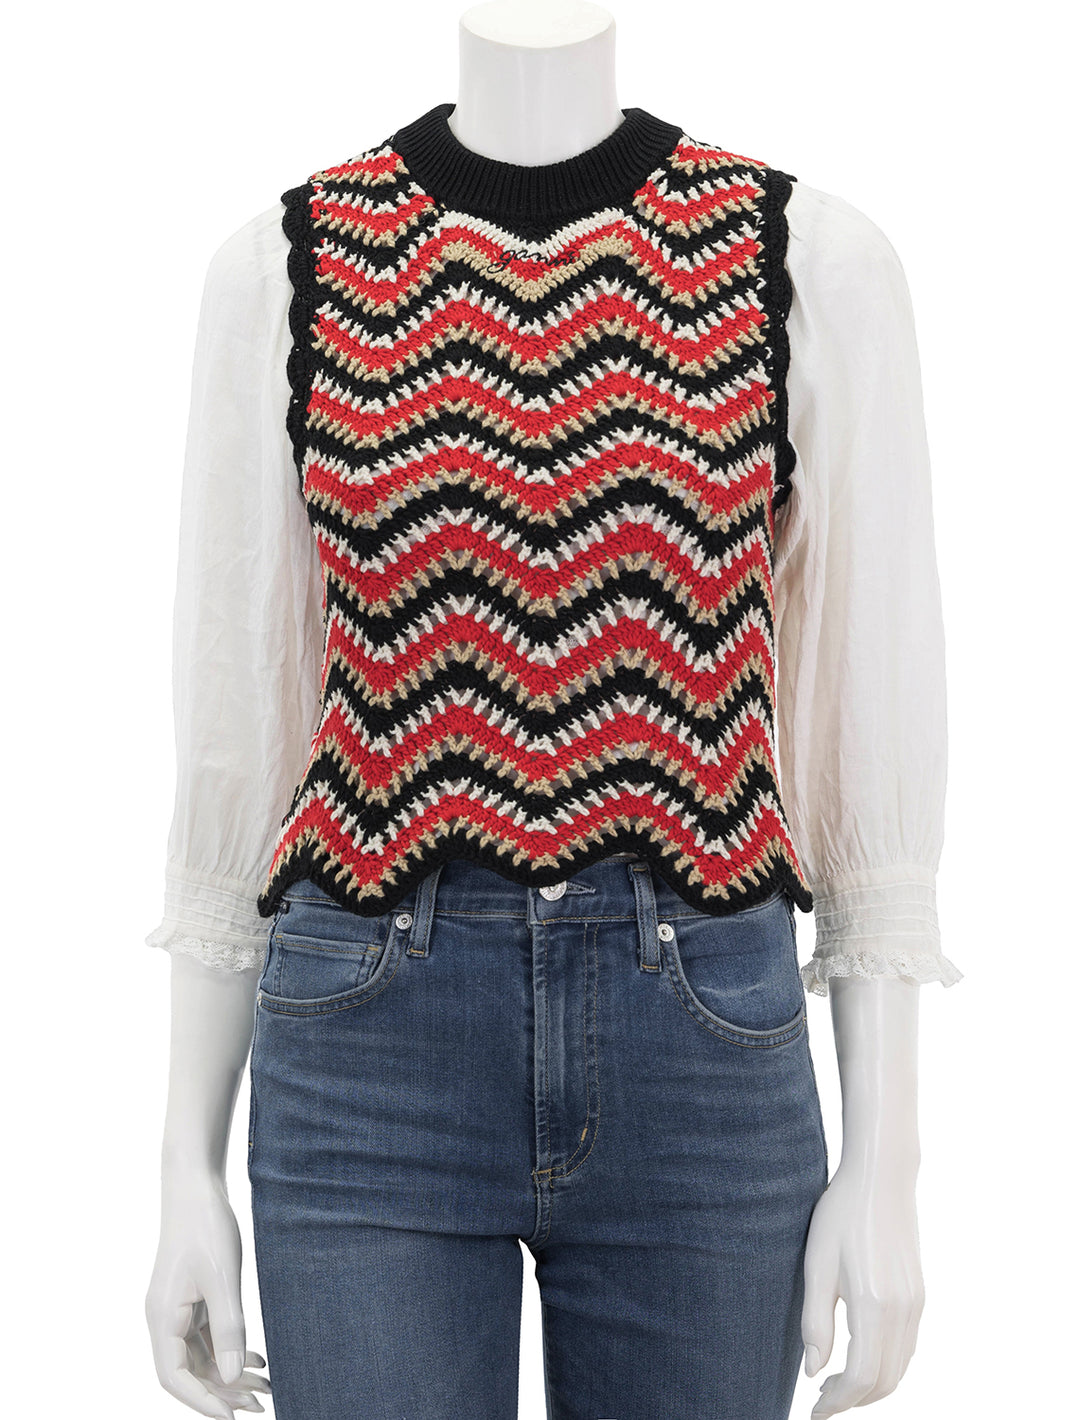 Front view of Ganni's cotton crochet vest in racing red.